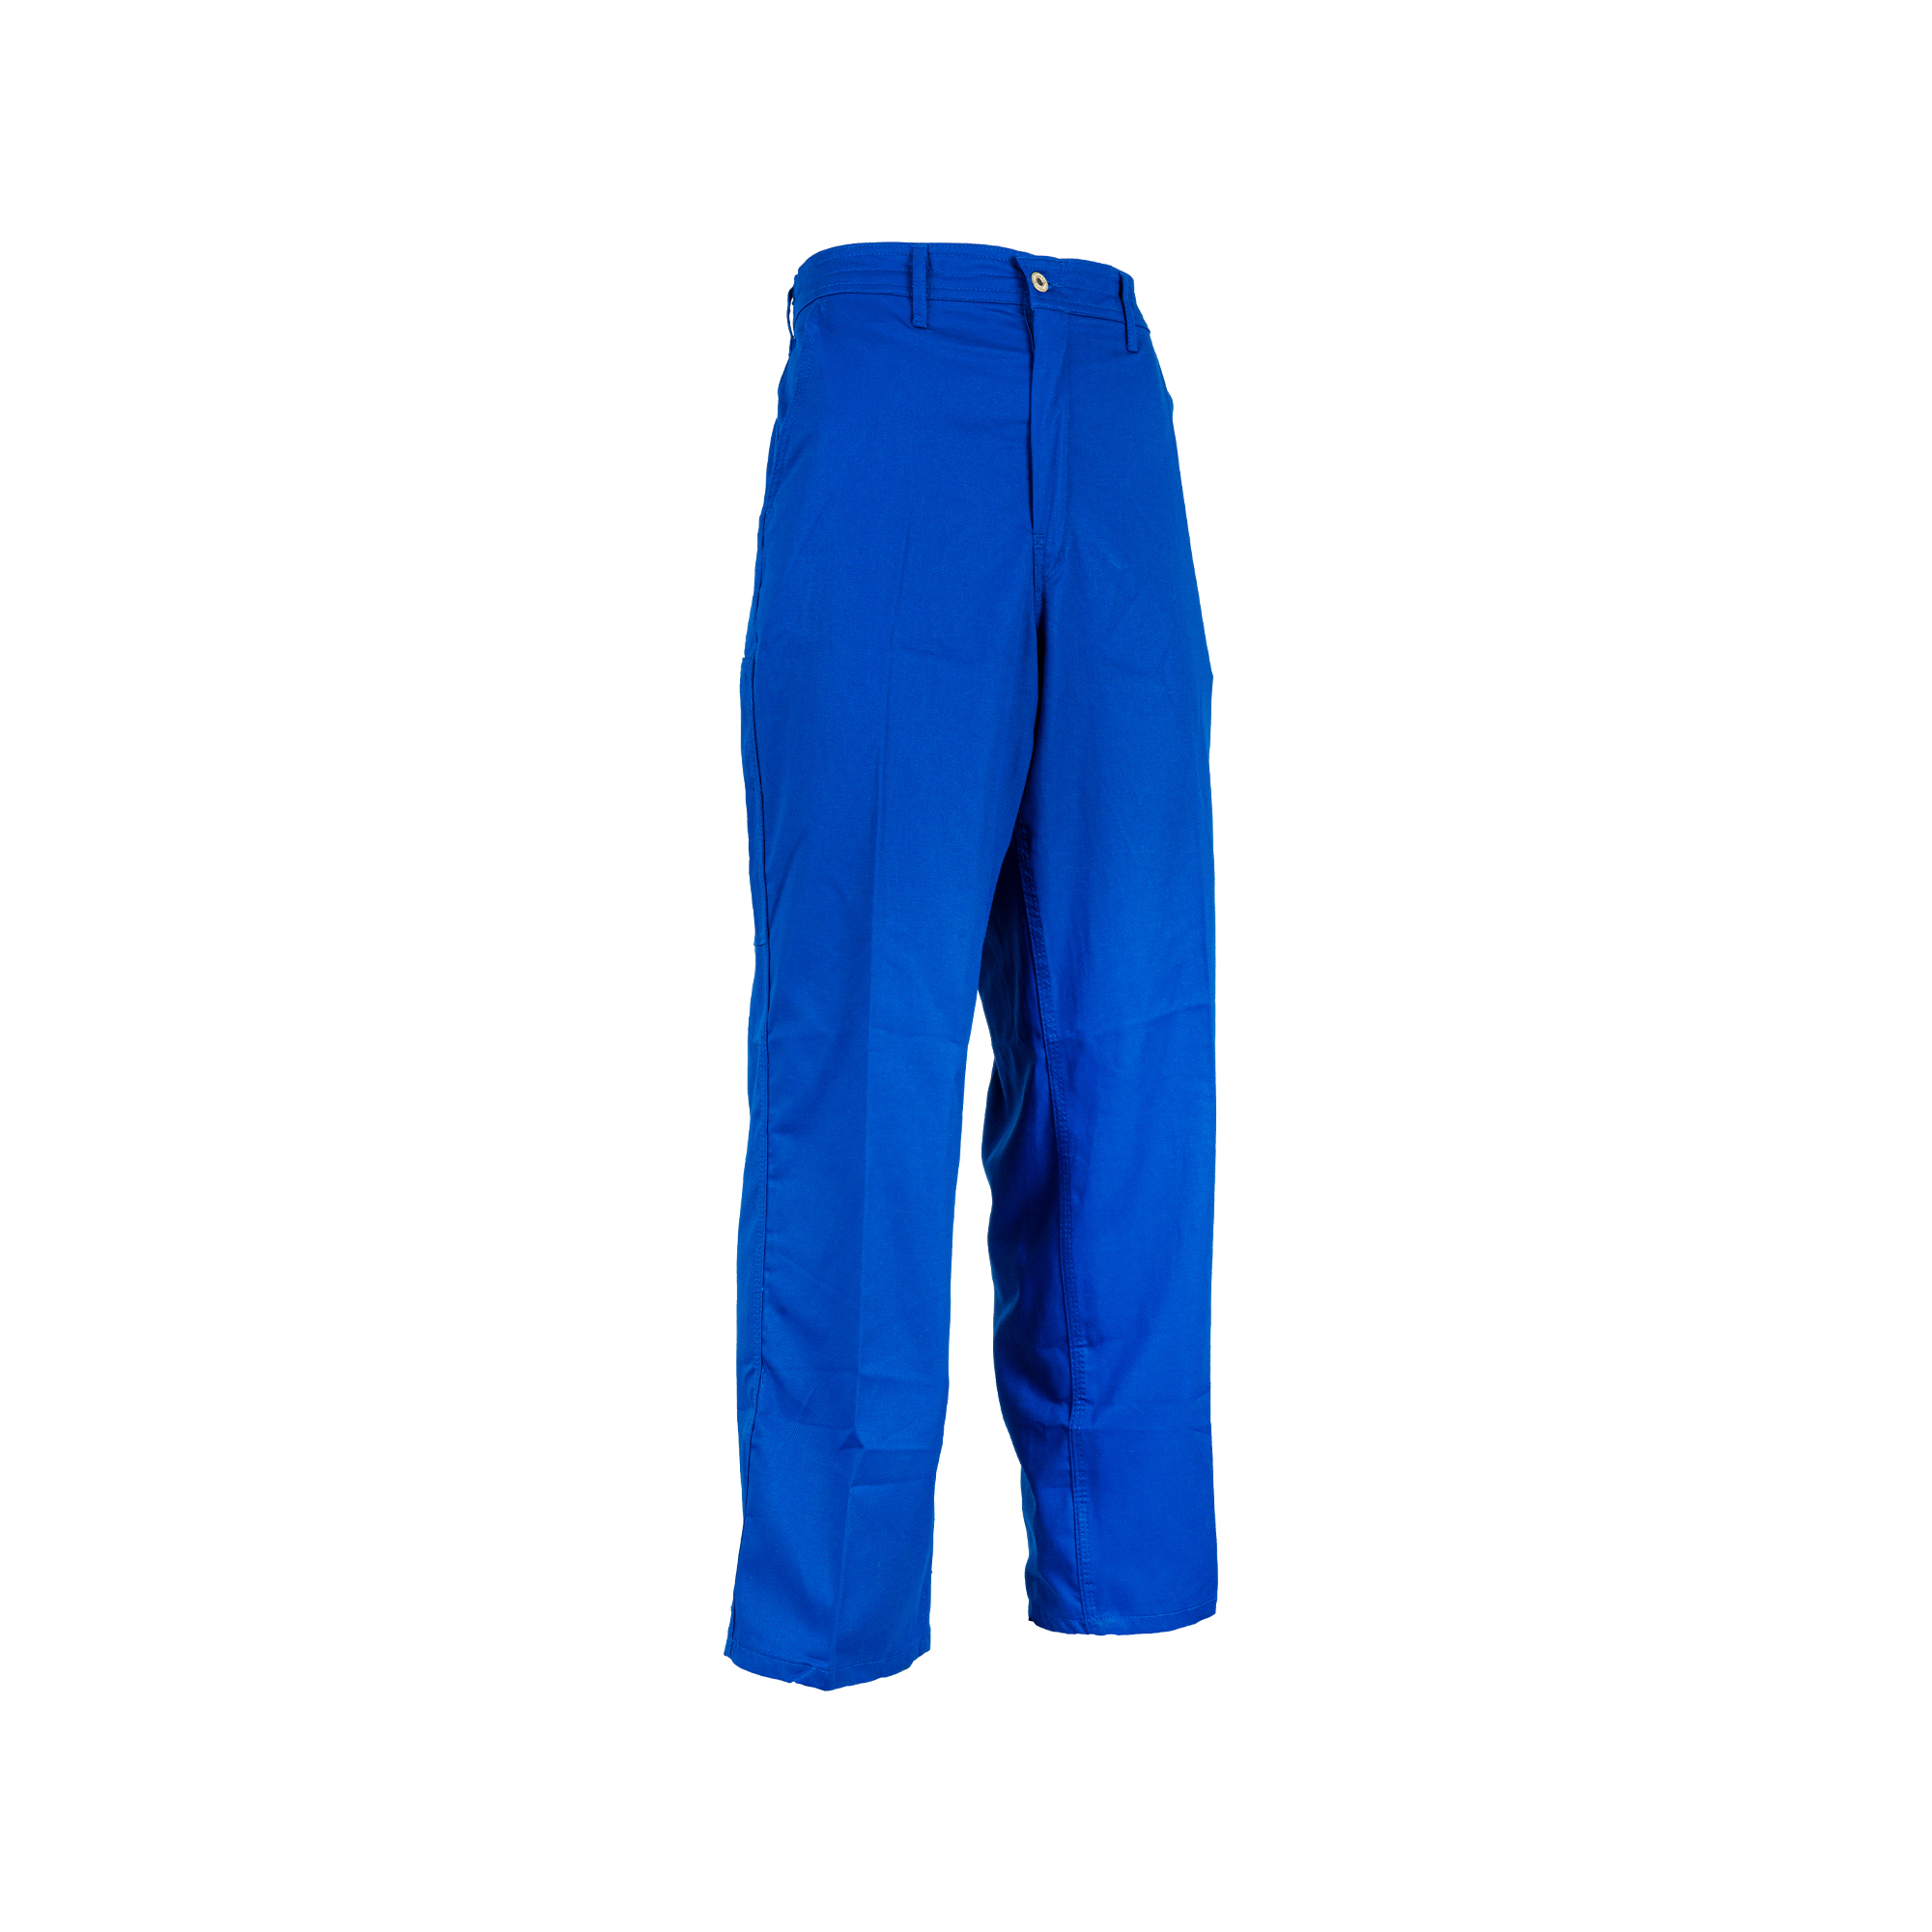 Sweet-Orr Heavy Duty Overall Trousers Royal Blue - Protekta Safety Gear